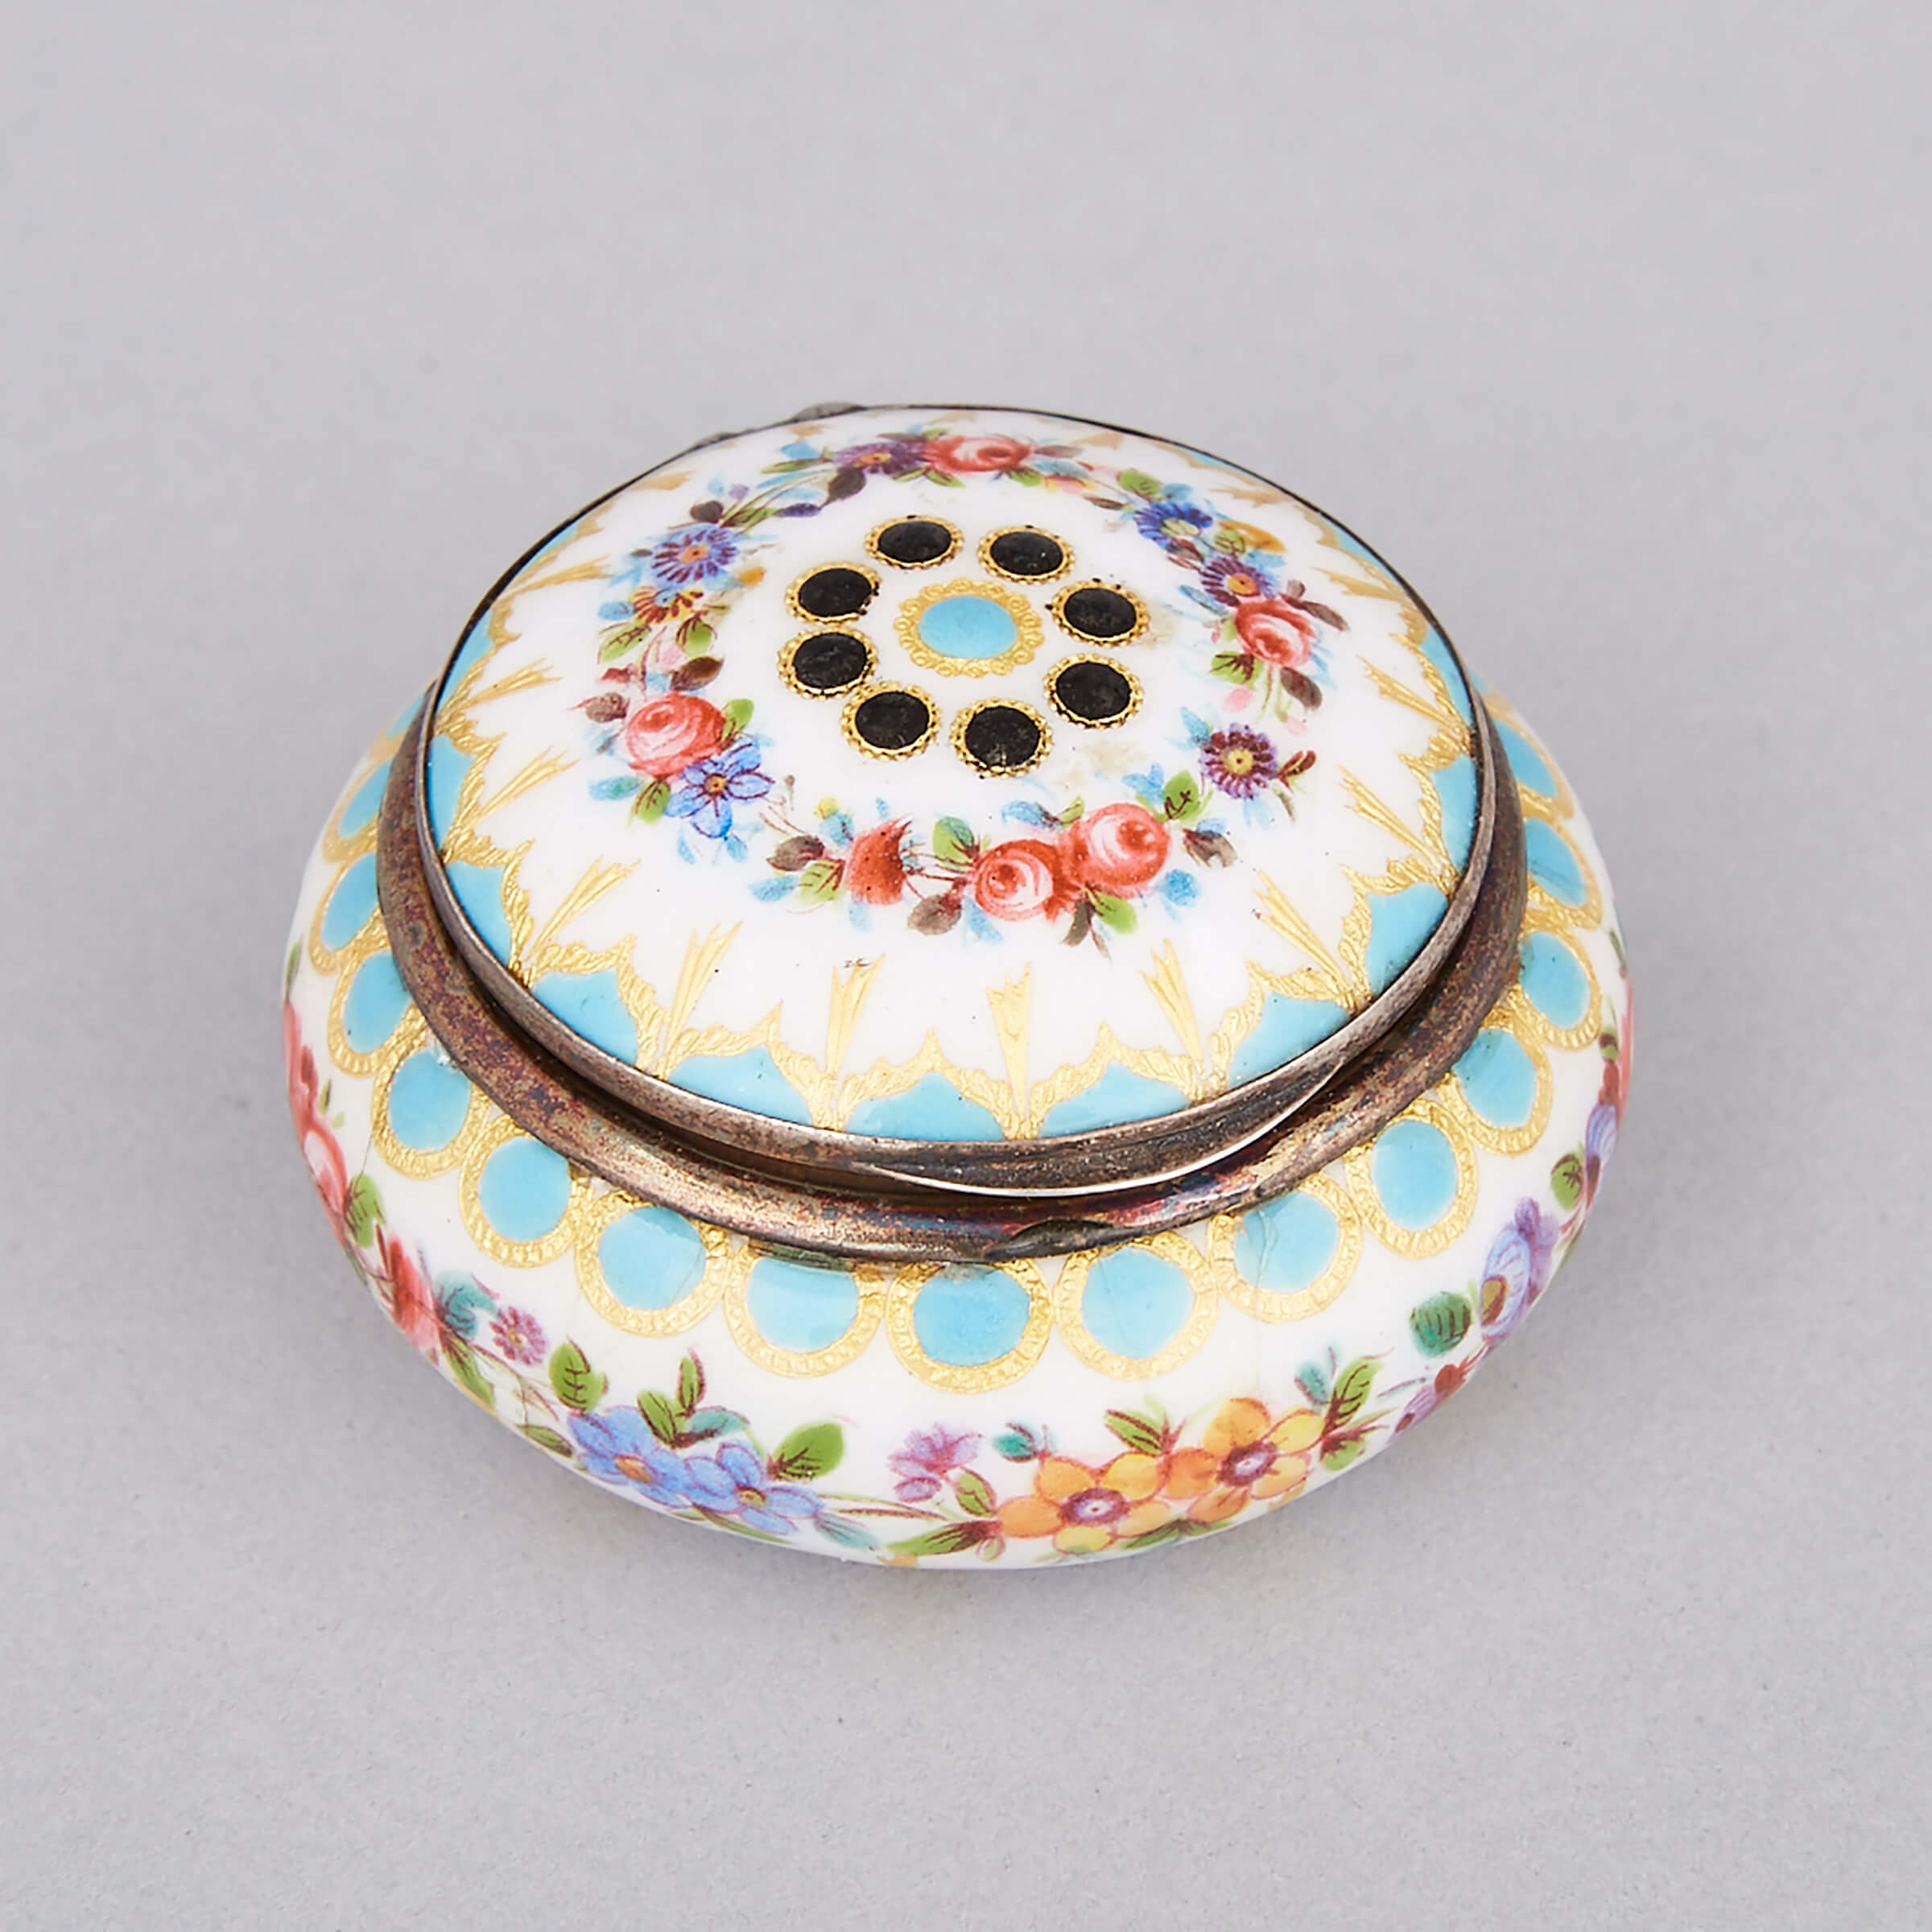 French Silver and Painted Enamel Circular Box, c.1900